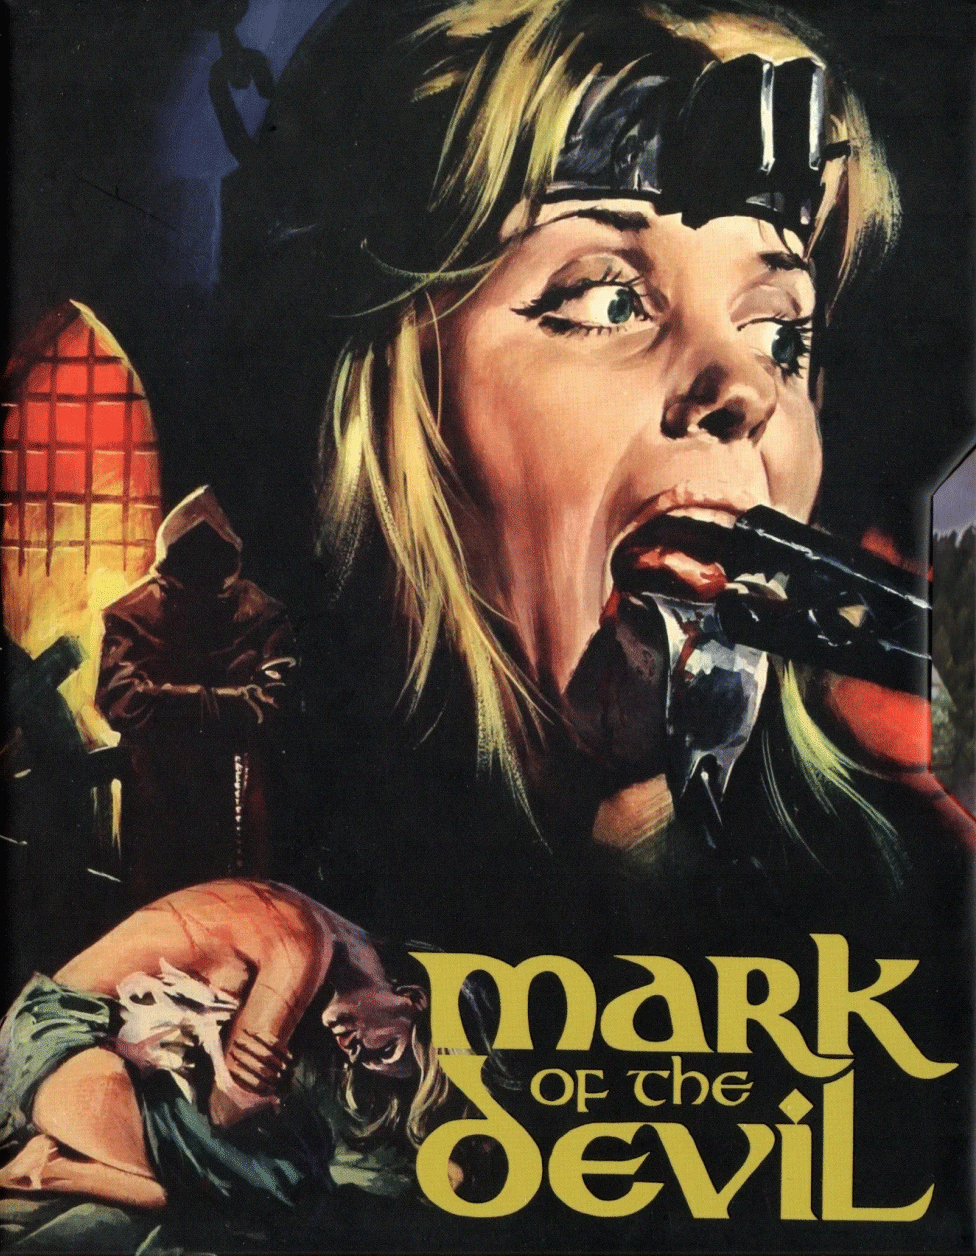 MARK OF THE DEVIL - 4K ULTRA HD/BLU-RAY (LIMITED EDITION)